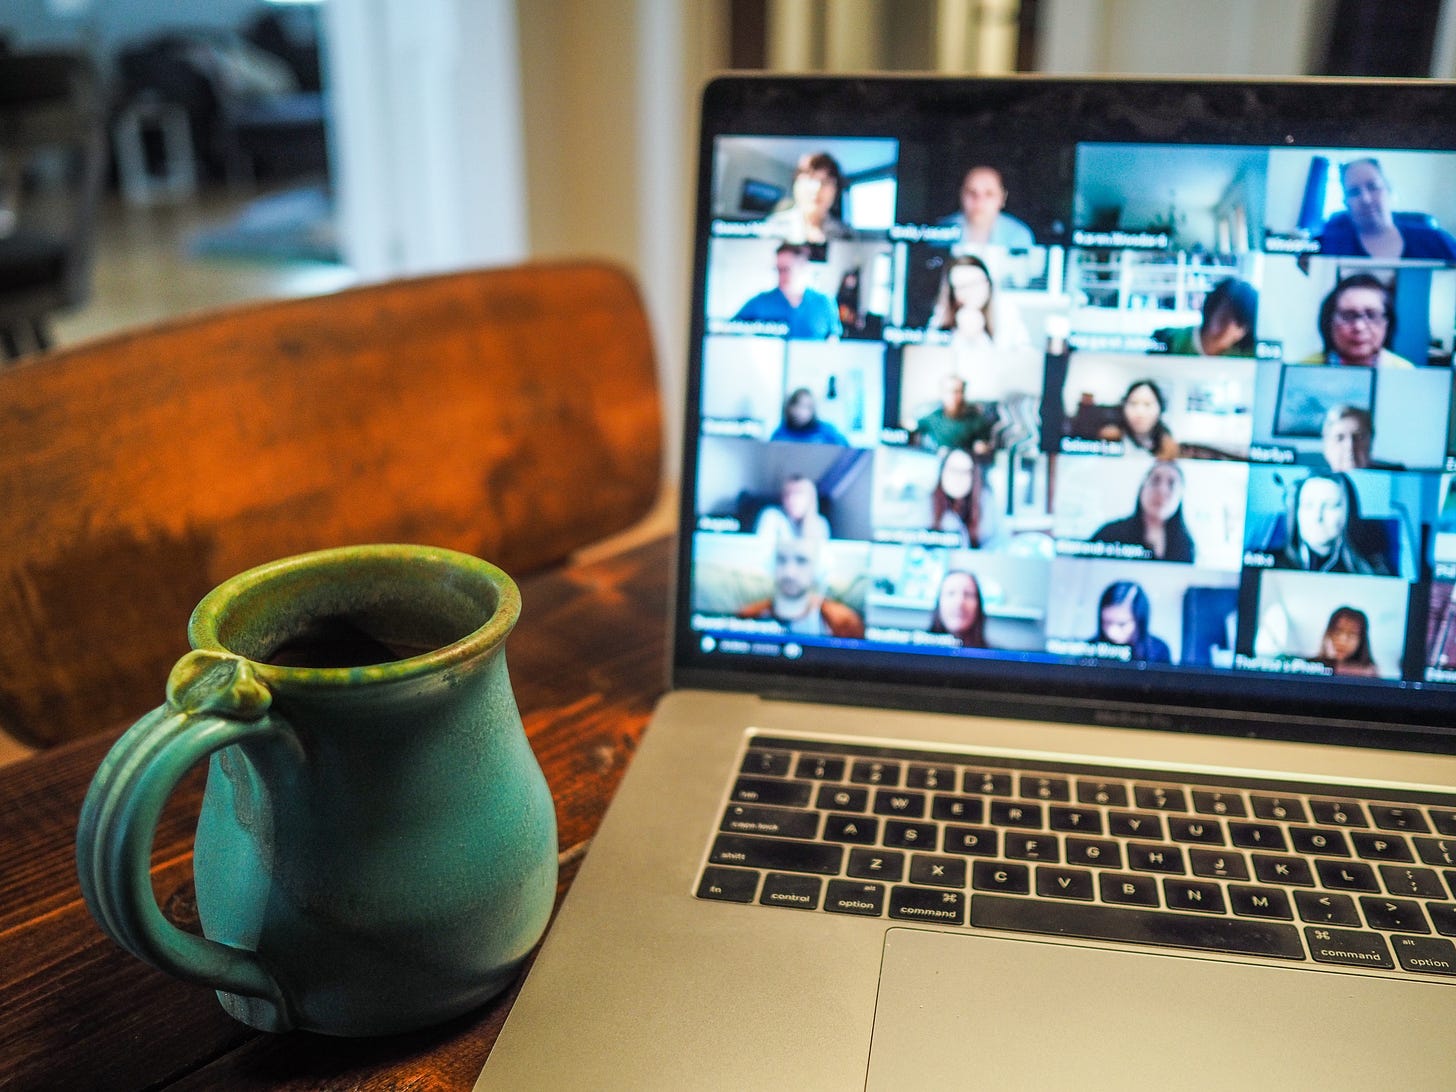 blue coffee cup placed next to a laptop screen showing a bunch of people on zoom